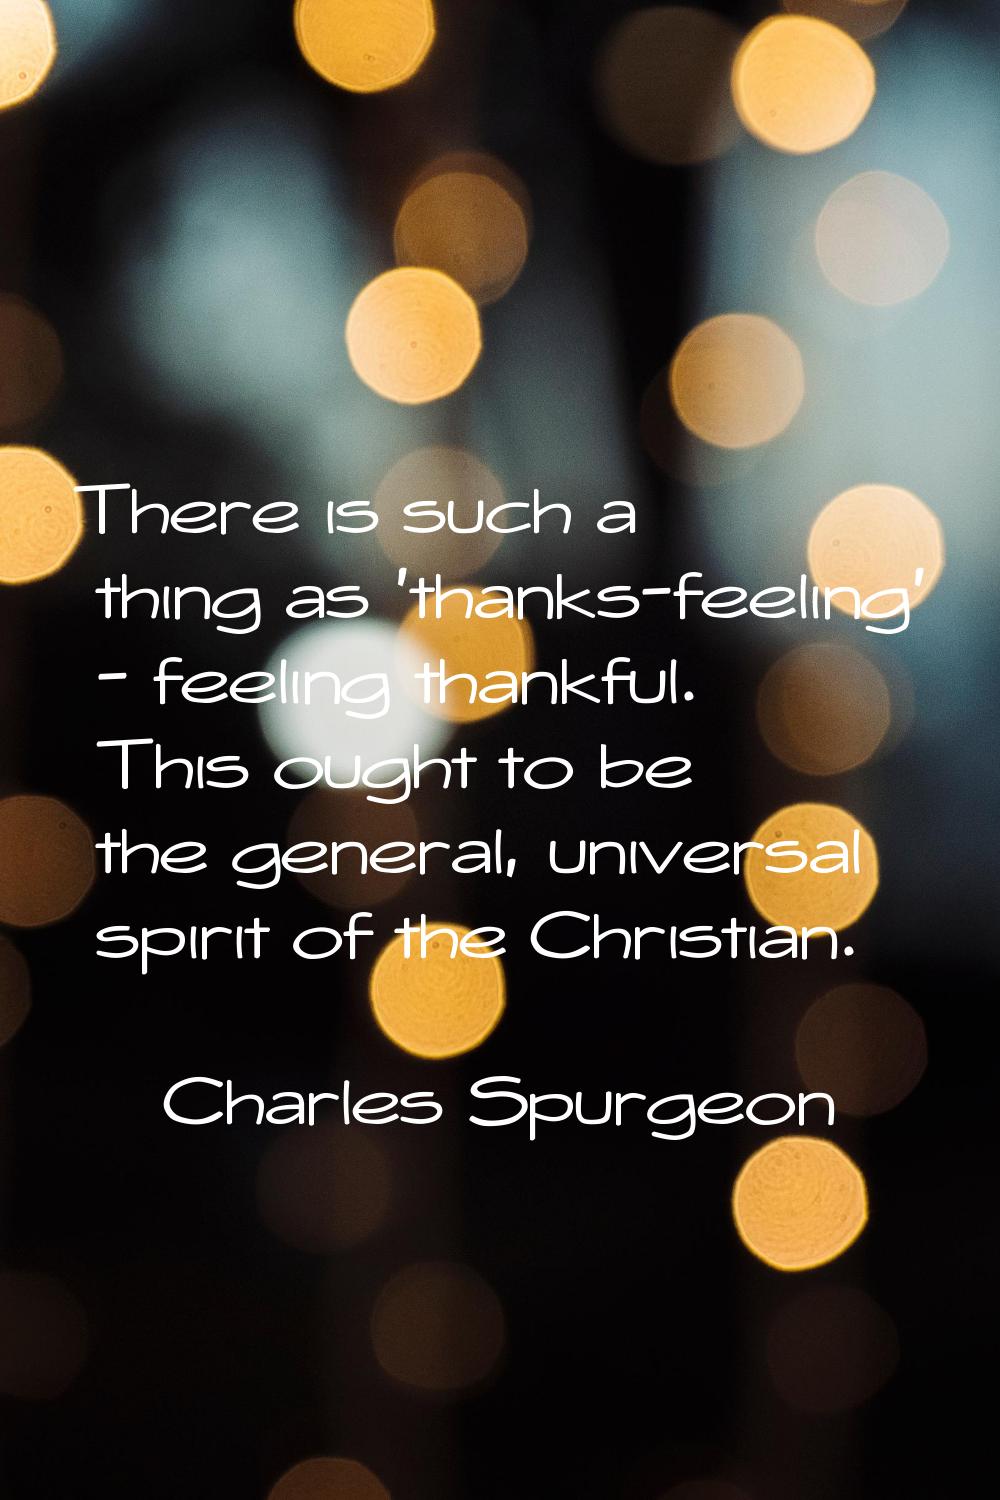 There is such a thing as 'thanks-feeling' - feeling thankful. This ought to be the general, univers